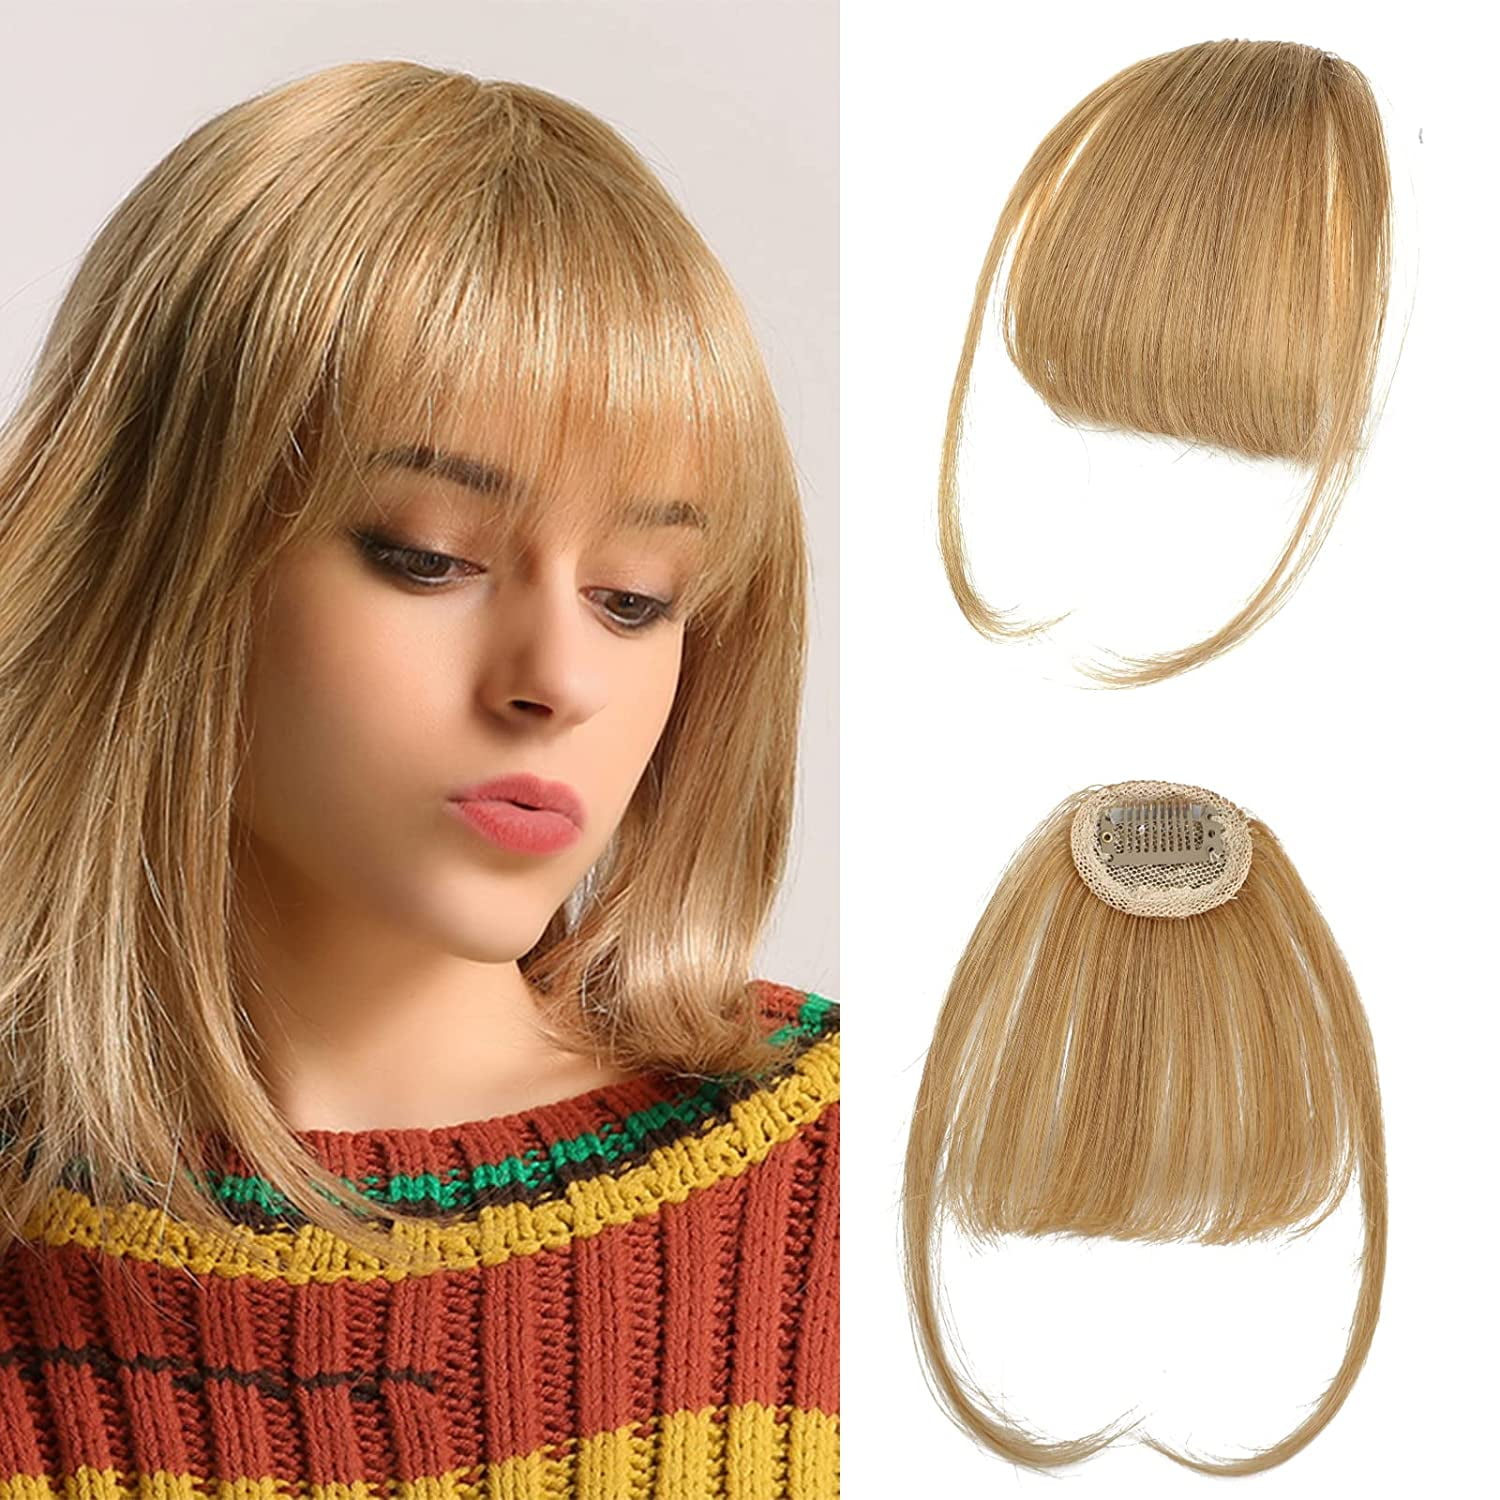 Ustar Bangs Hair Clip in Bangs 100% Real Human Hair Extensions Natural Black Color #1 Wispy Bangs Clip on Air Bangs for Women Fringe with Temples